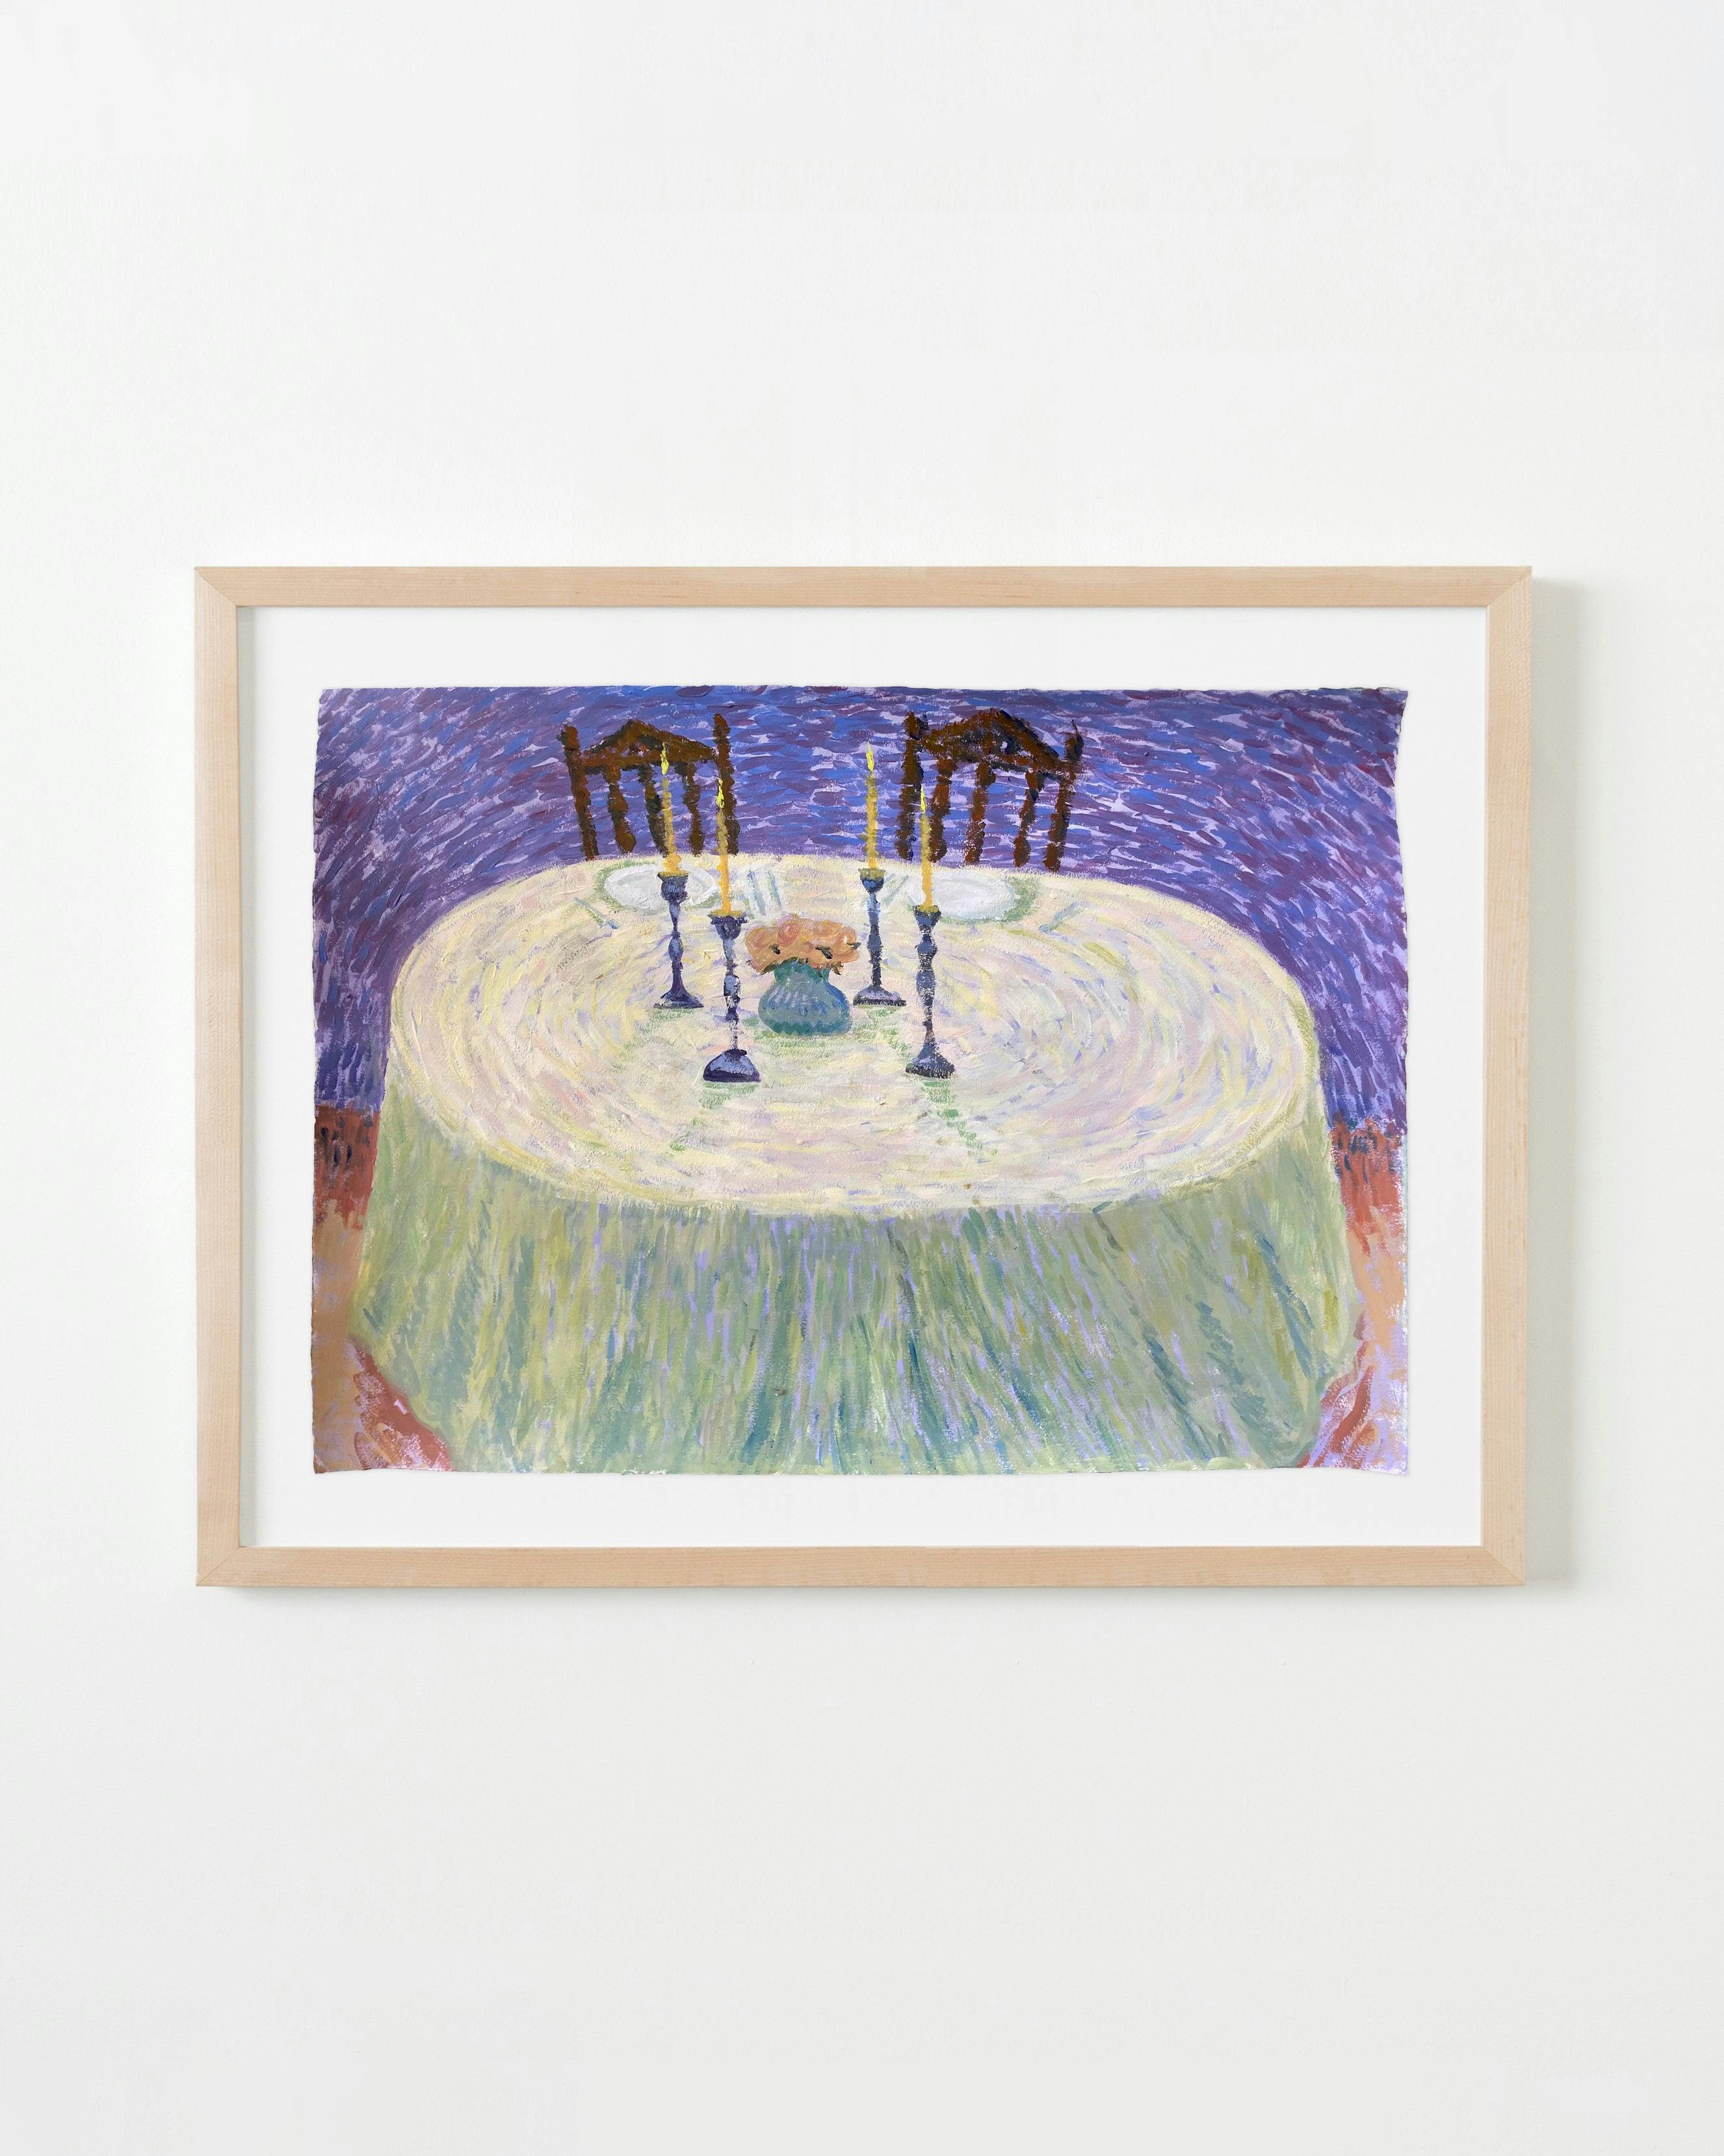 Painting by Jackson Joyce titled "The Table is Set".